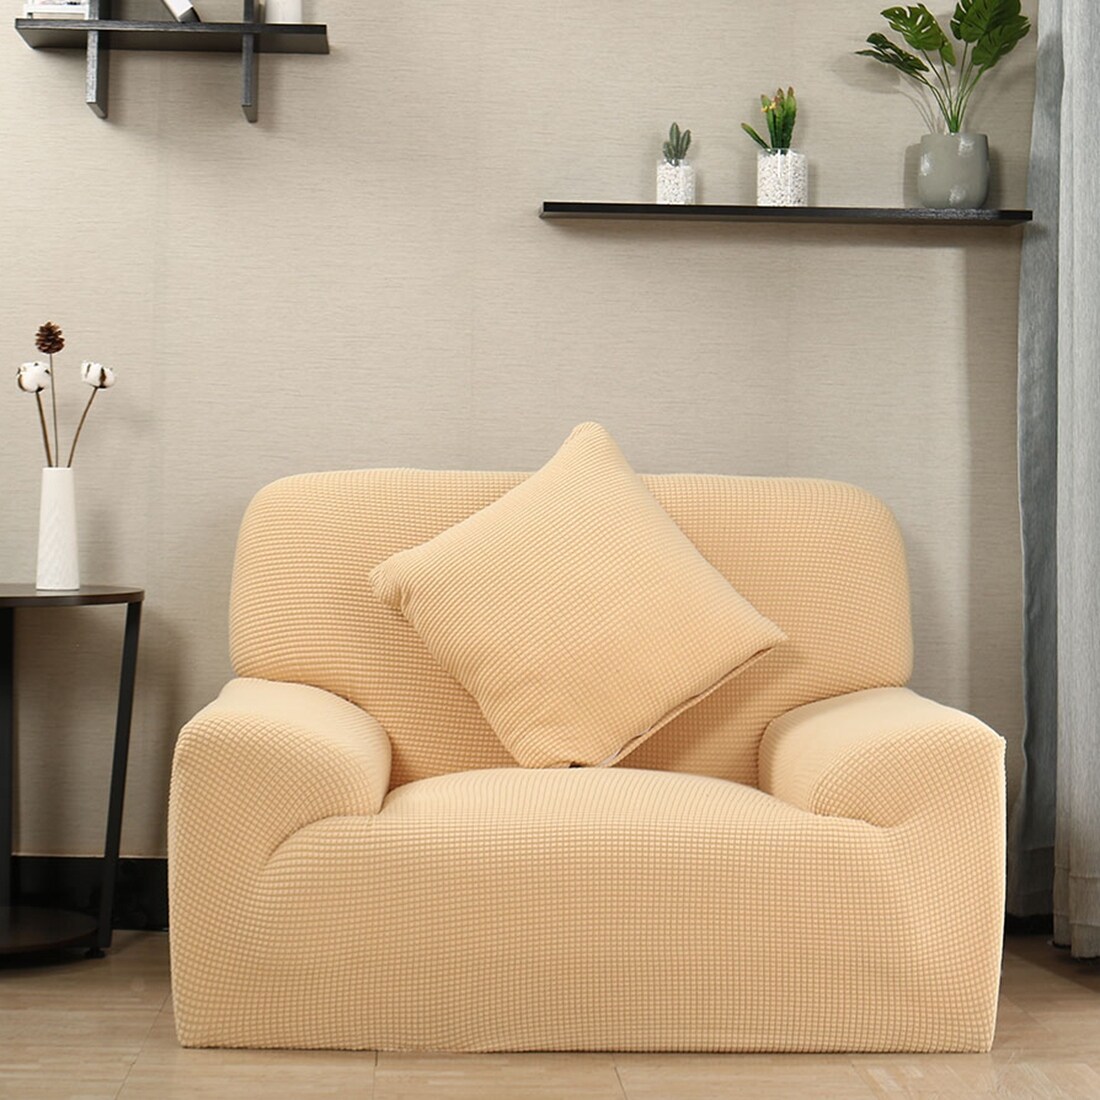 Beige Dightyoho Jacquard Sofa Covers Wing Chair Elastic Fabric Stretch Couch Slipcover Polyester Spandex Furniture Protector